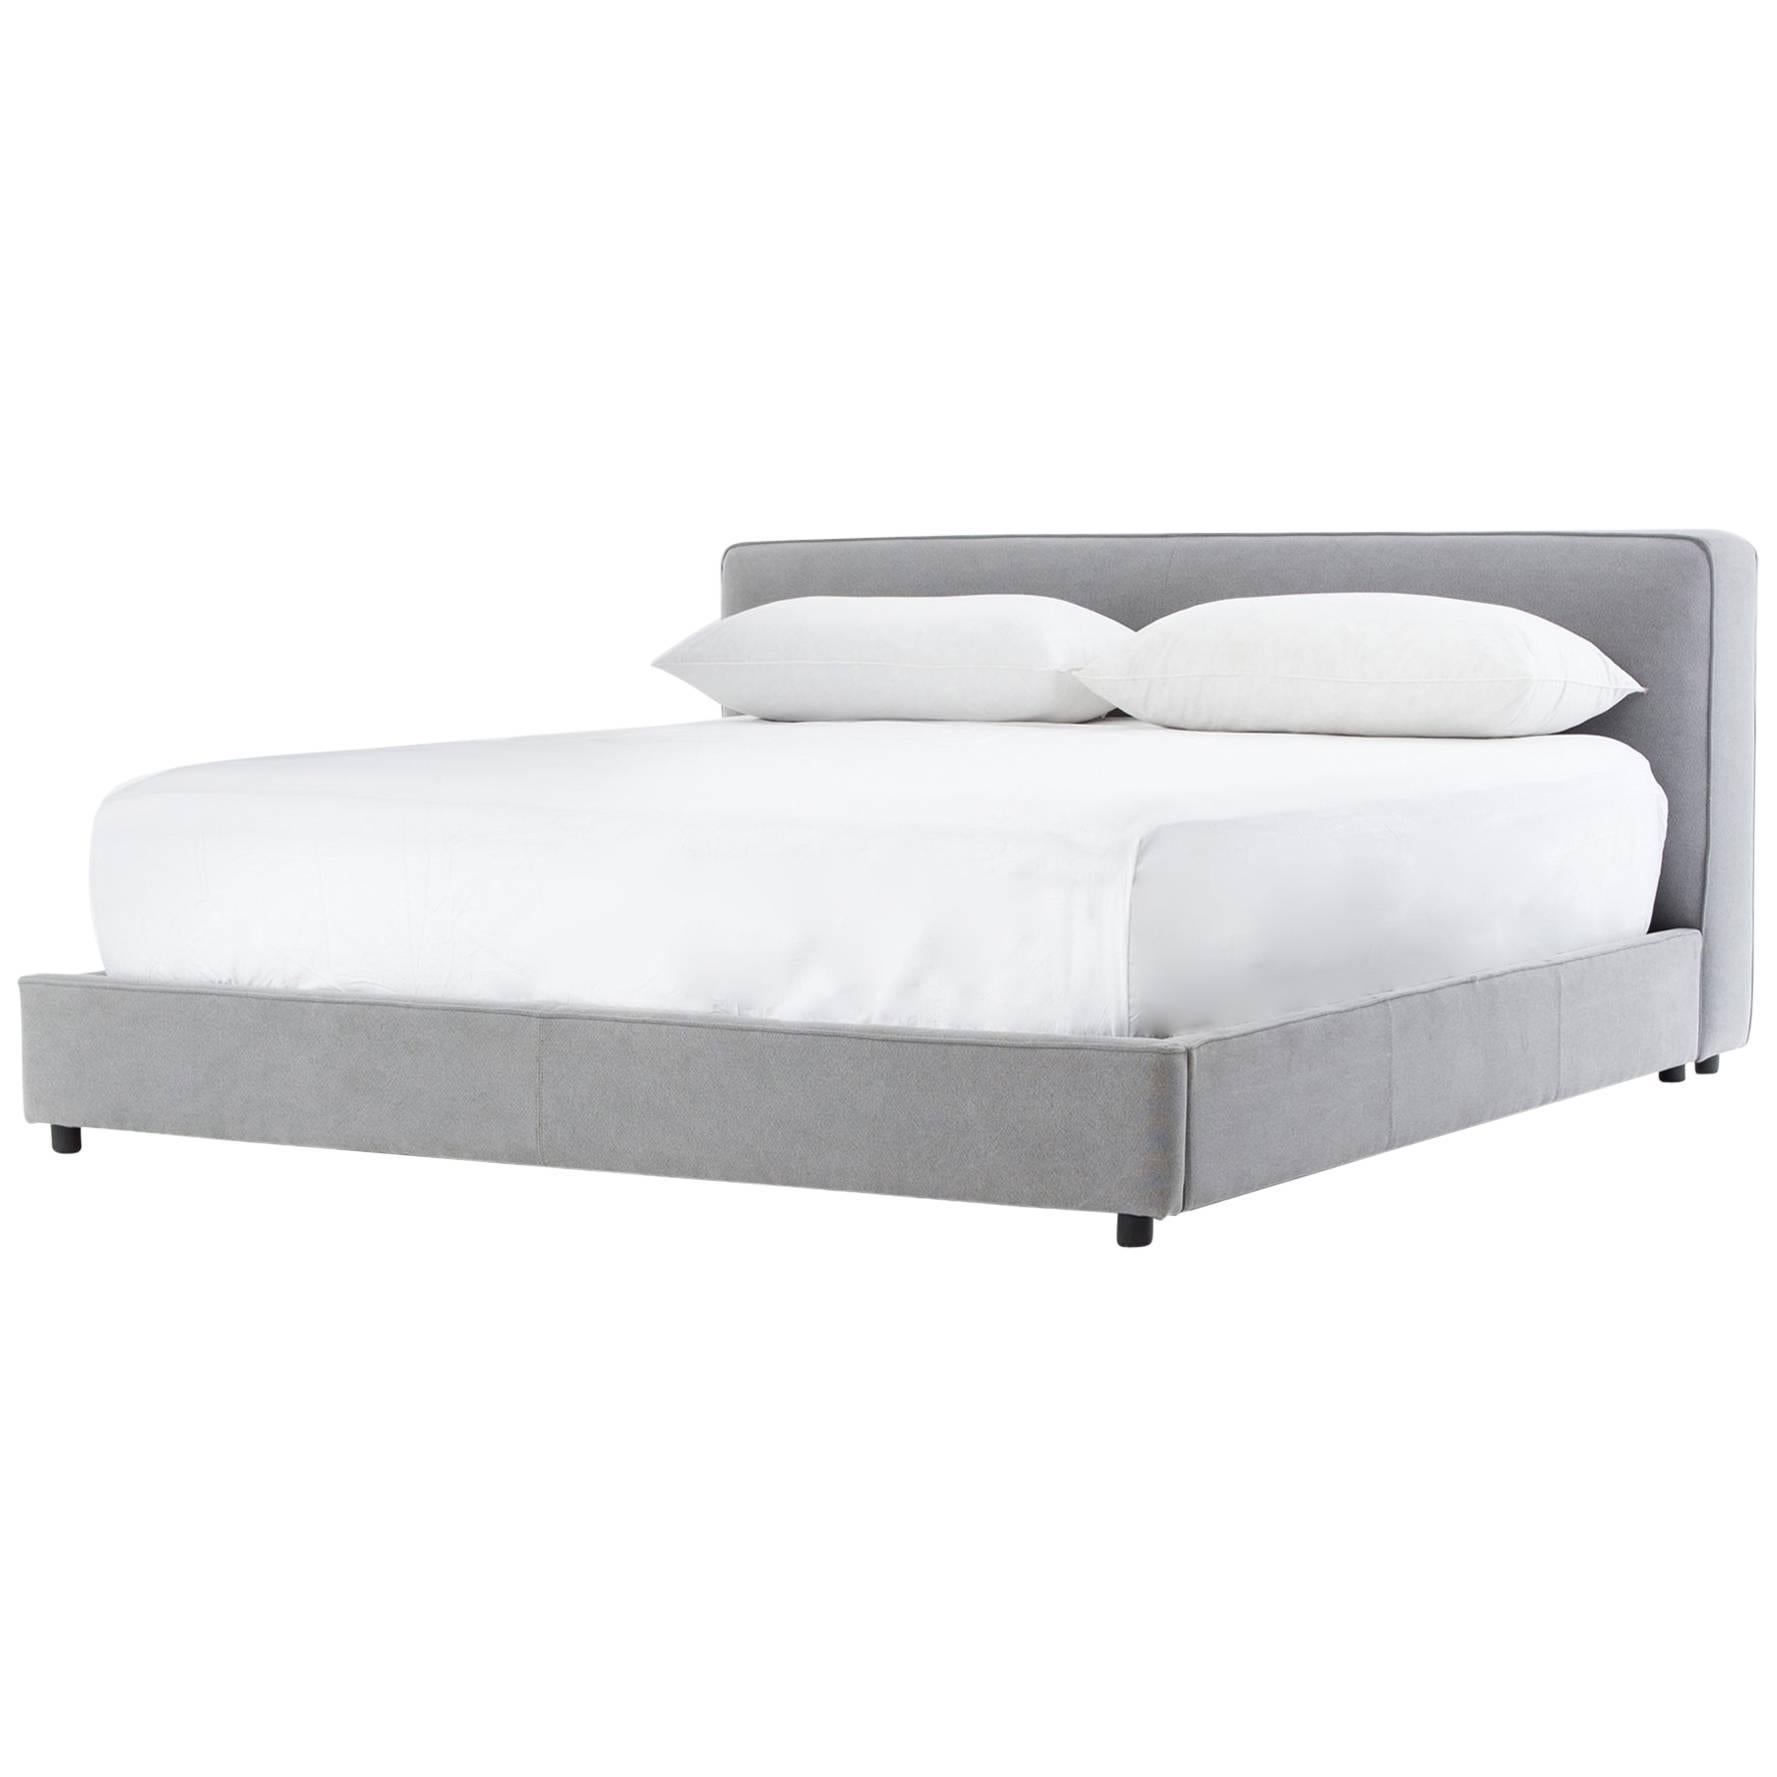 Upholstered Low Profile Bed For Sale